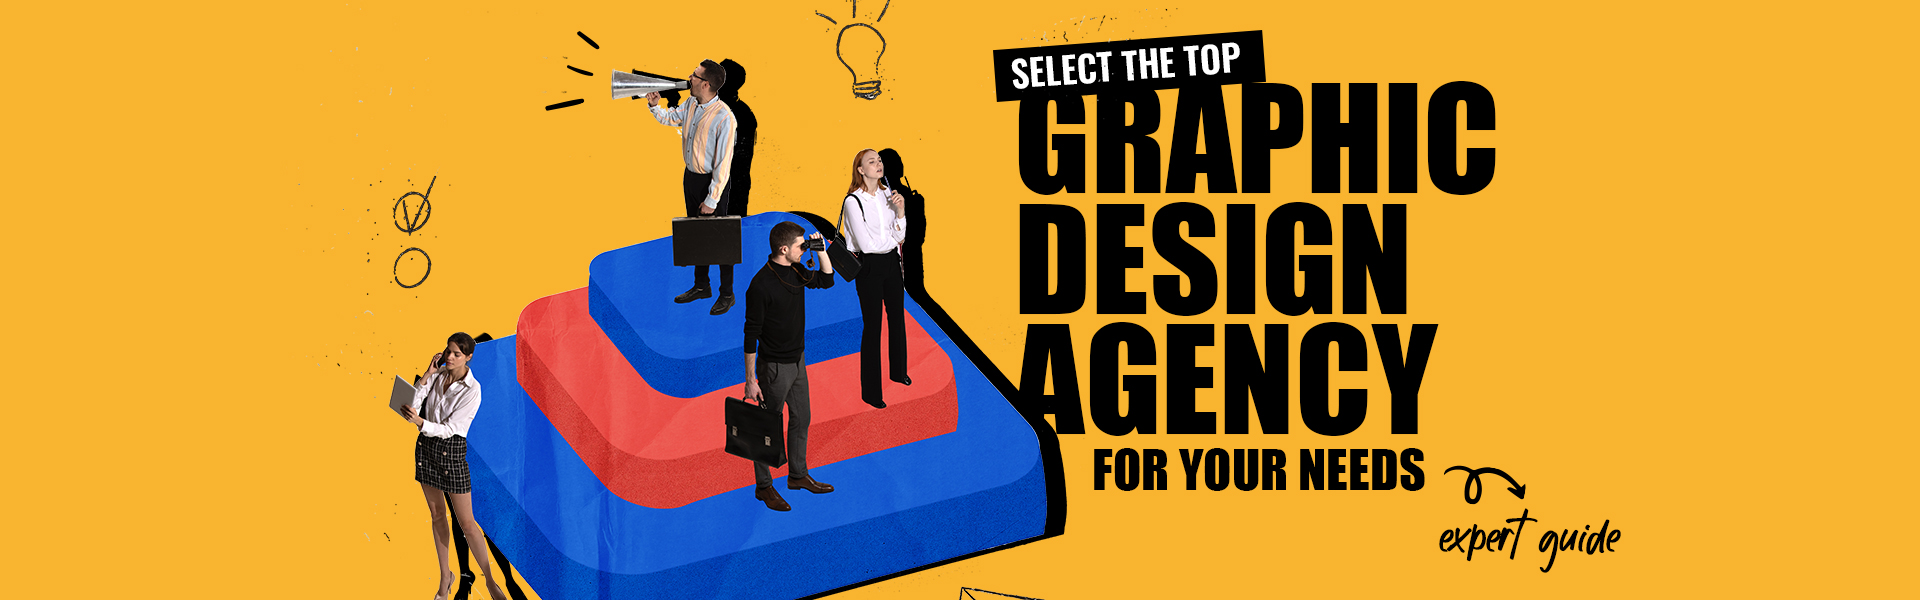 Select the Top Graphic Design Agency for Your Needs [Expert Guide]_main-banner